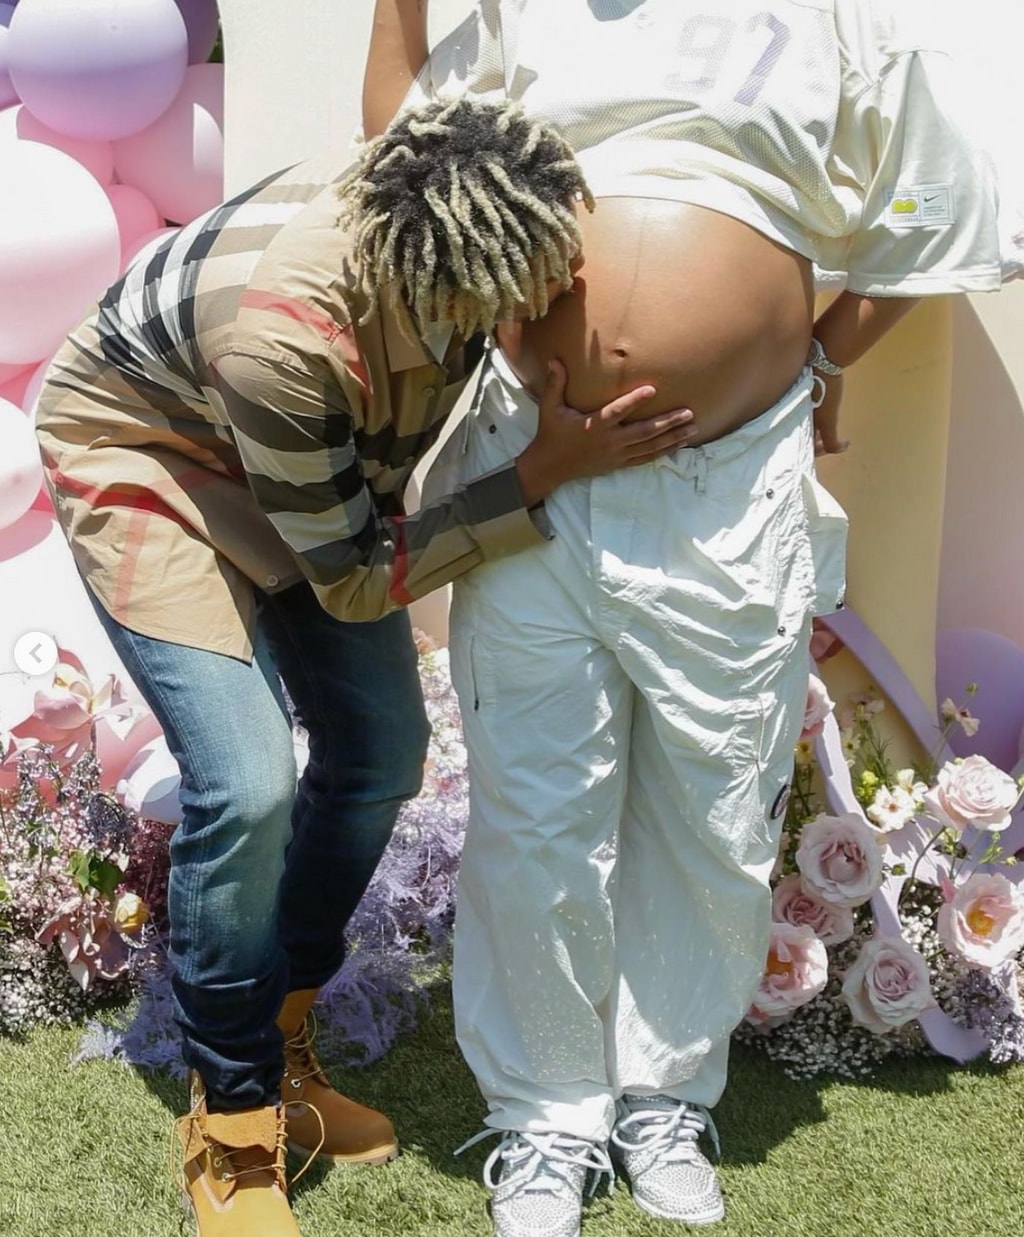 Photo posted by Naomi Osaka on Instagram June 2 2023 of her boyfriend Cordae kissing her baby bump at her baby shower.